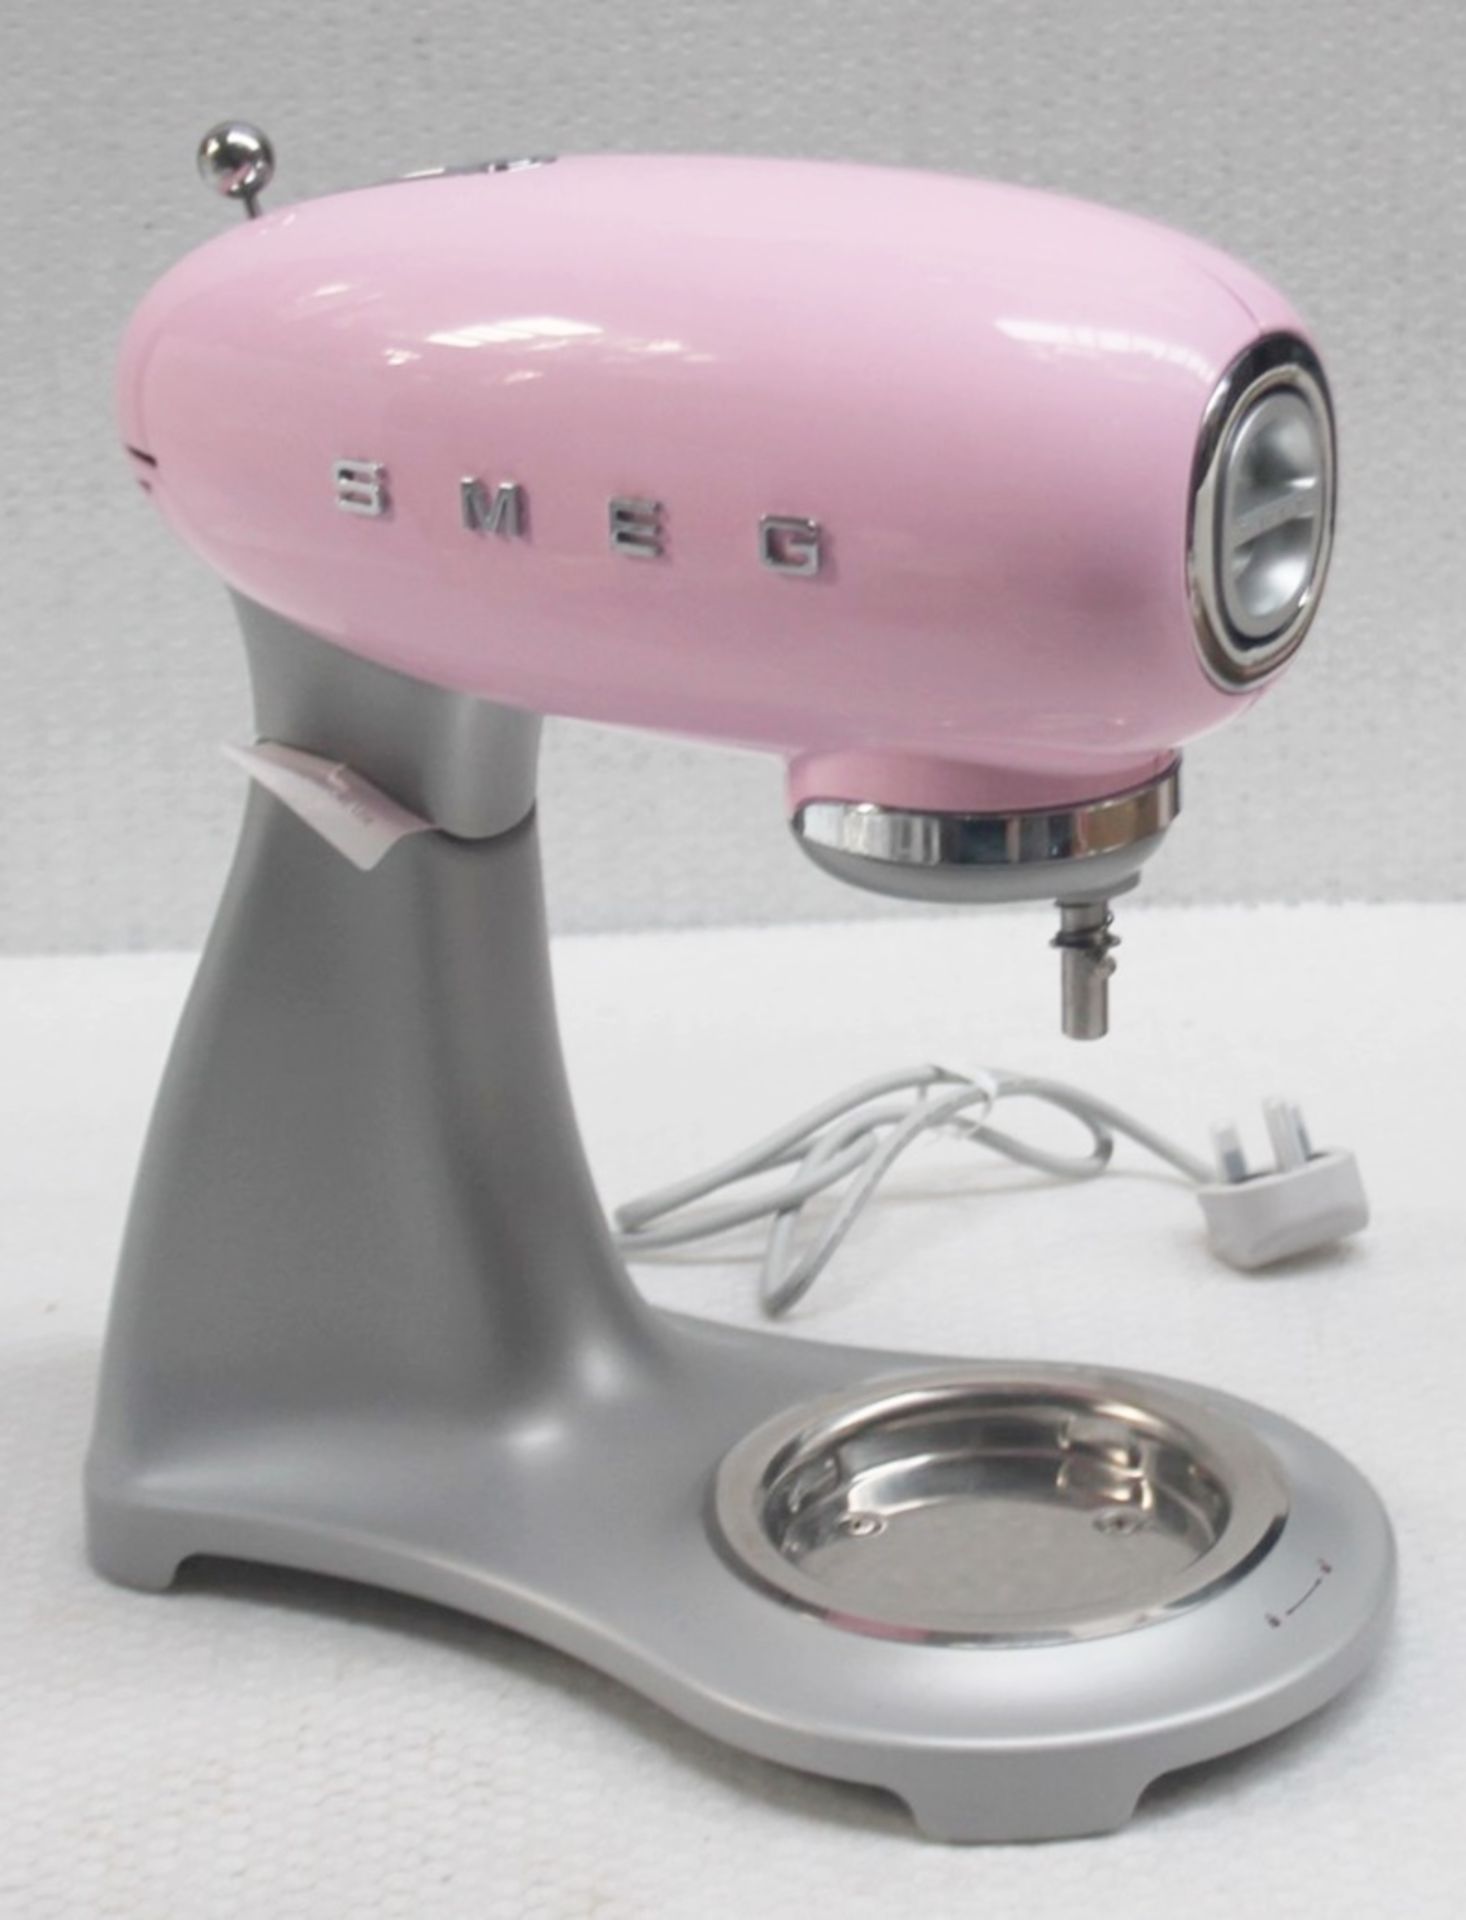 1 x SMEG 50's Retro Stand Mixer In Pink With 4.8 Litre Bowl And Accessories - RRP £499.00 - Image 3 of 14